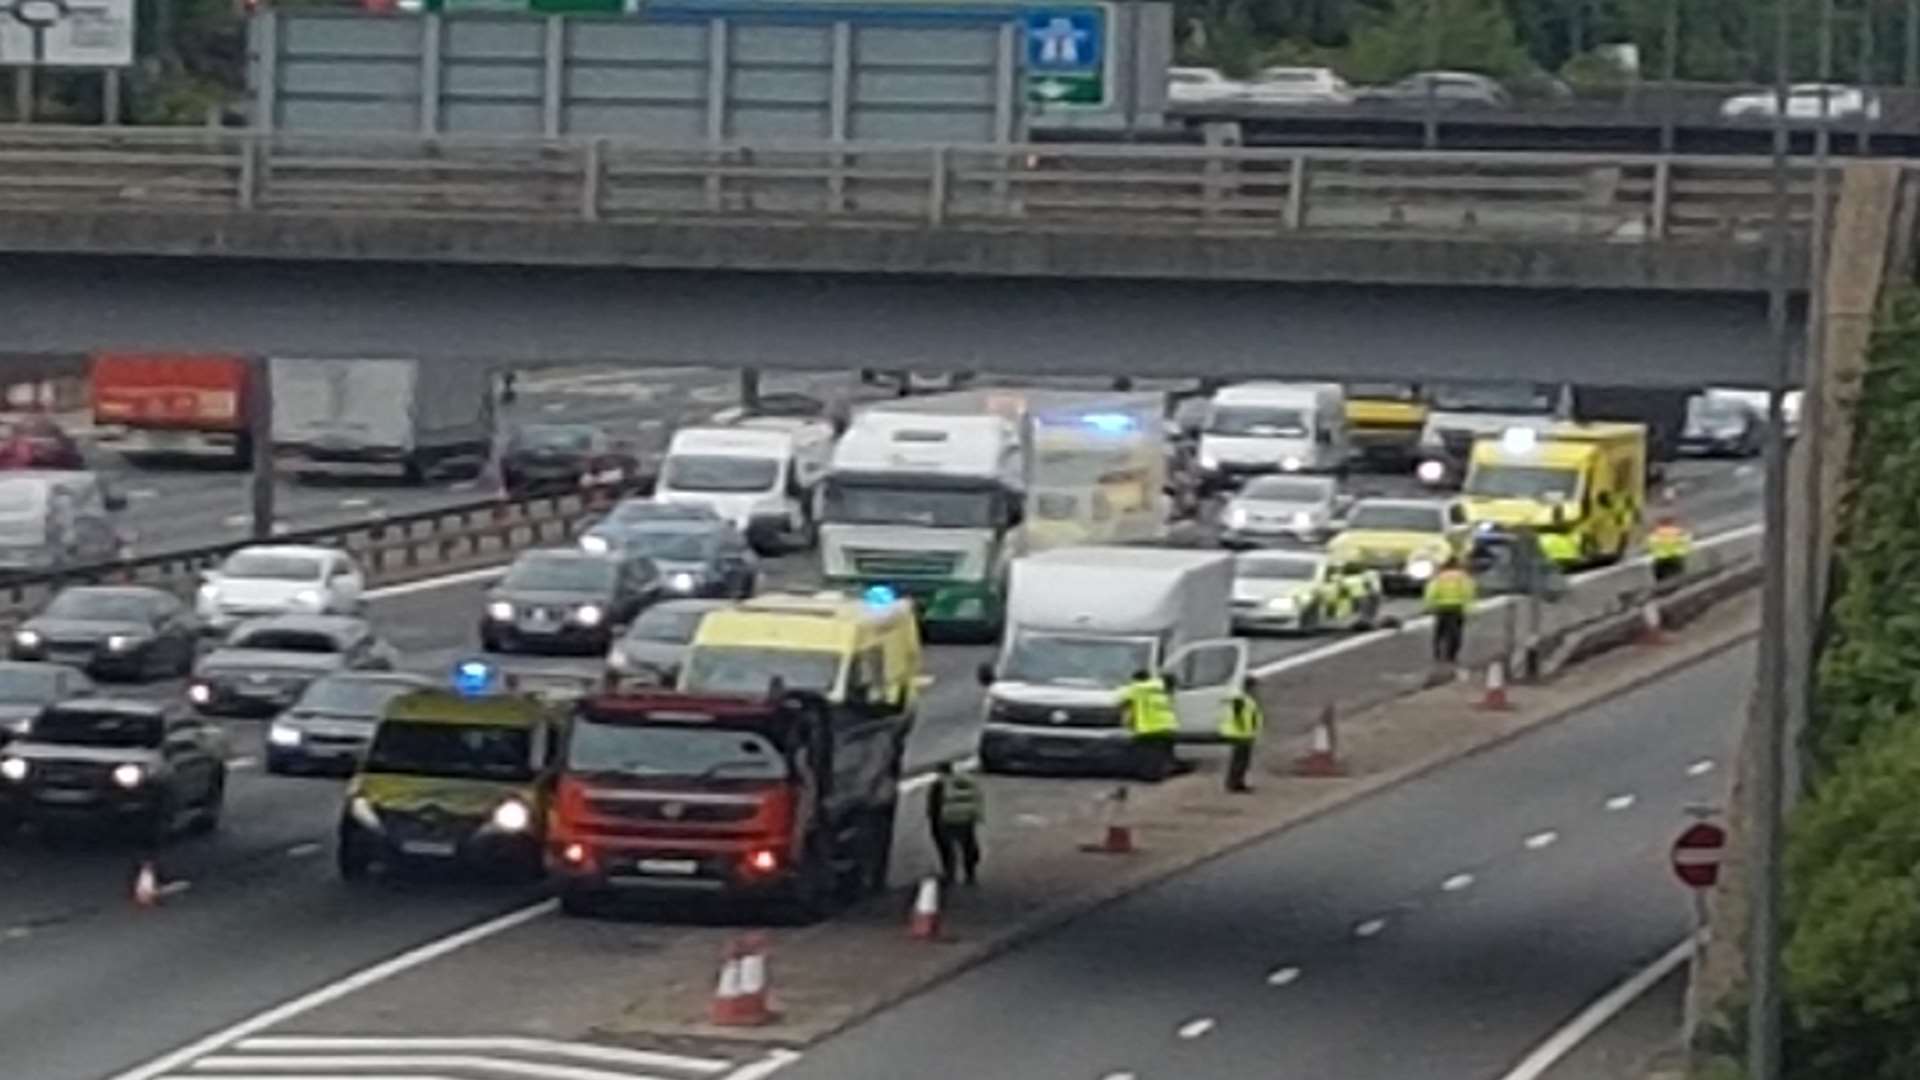 Another crash is causing delays for drivers approaching the Dartford Crossing